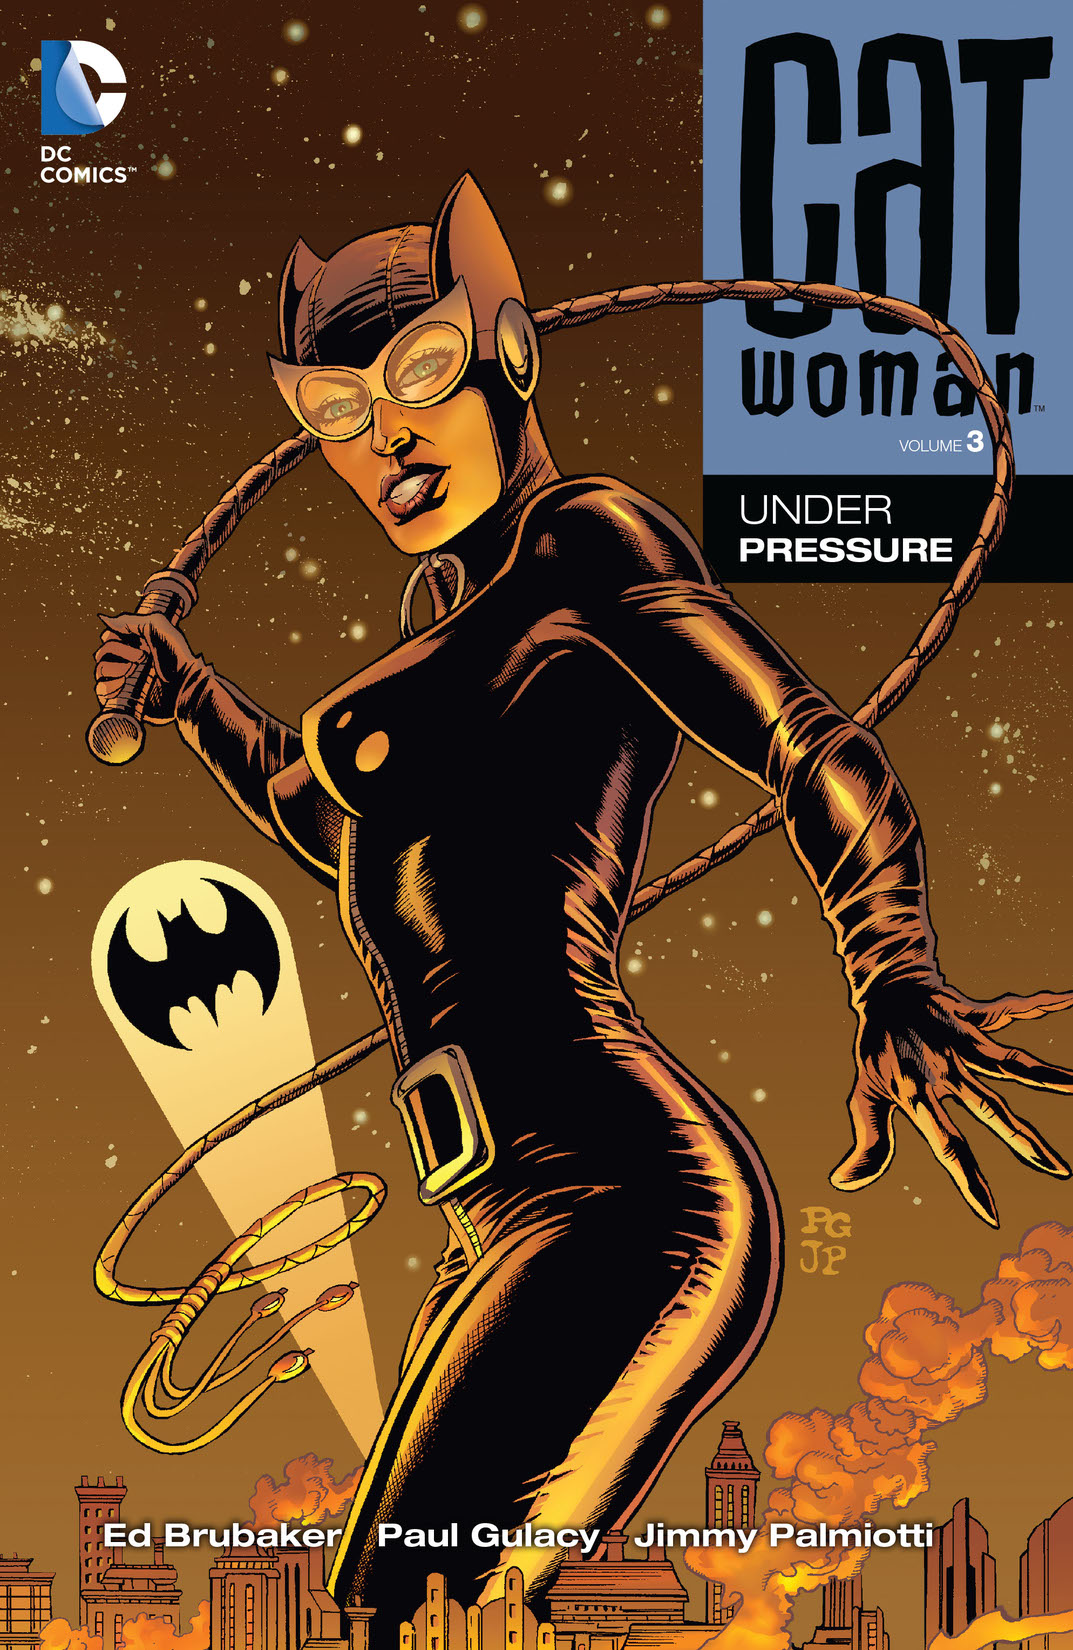 Catwoman Vol. 3: Under Pressure preview images